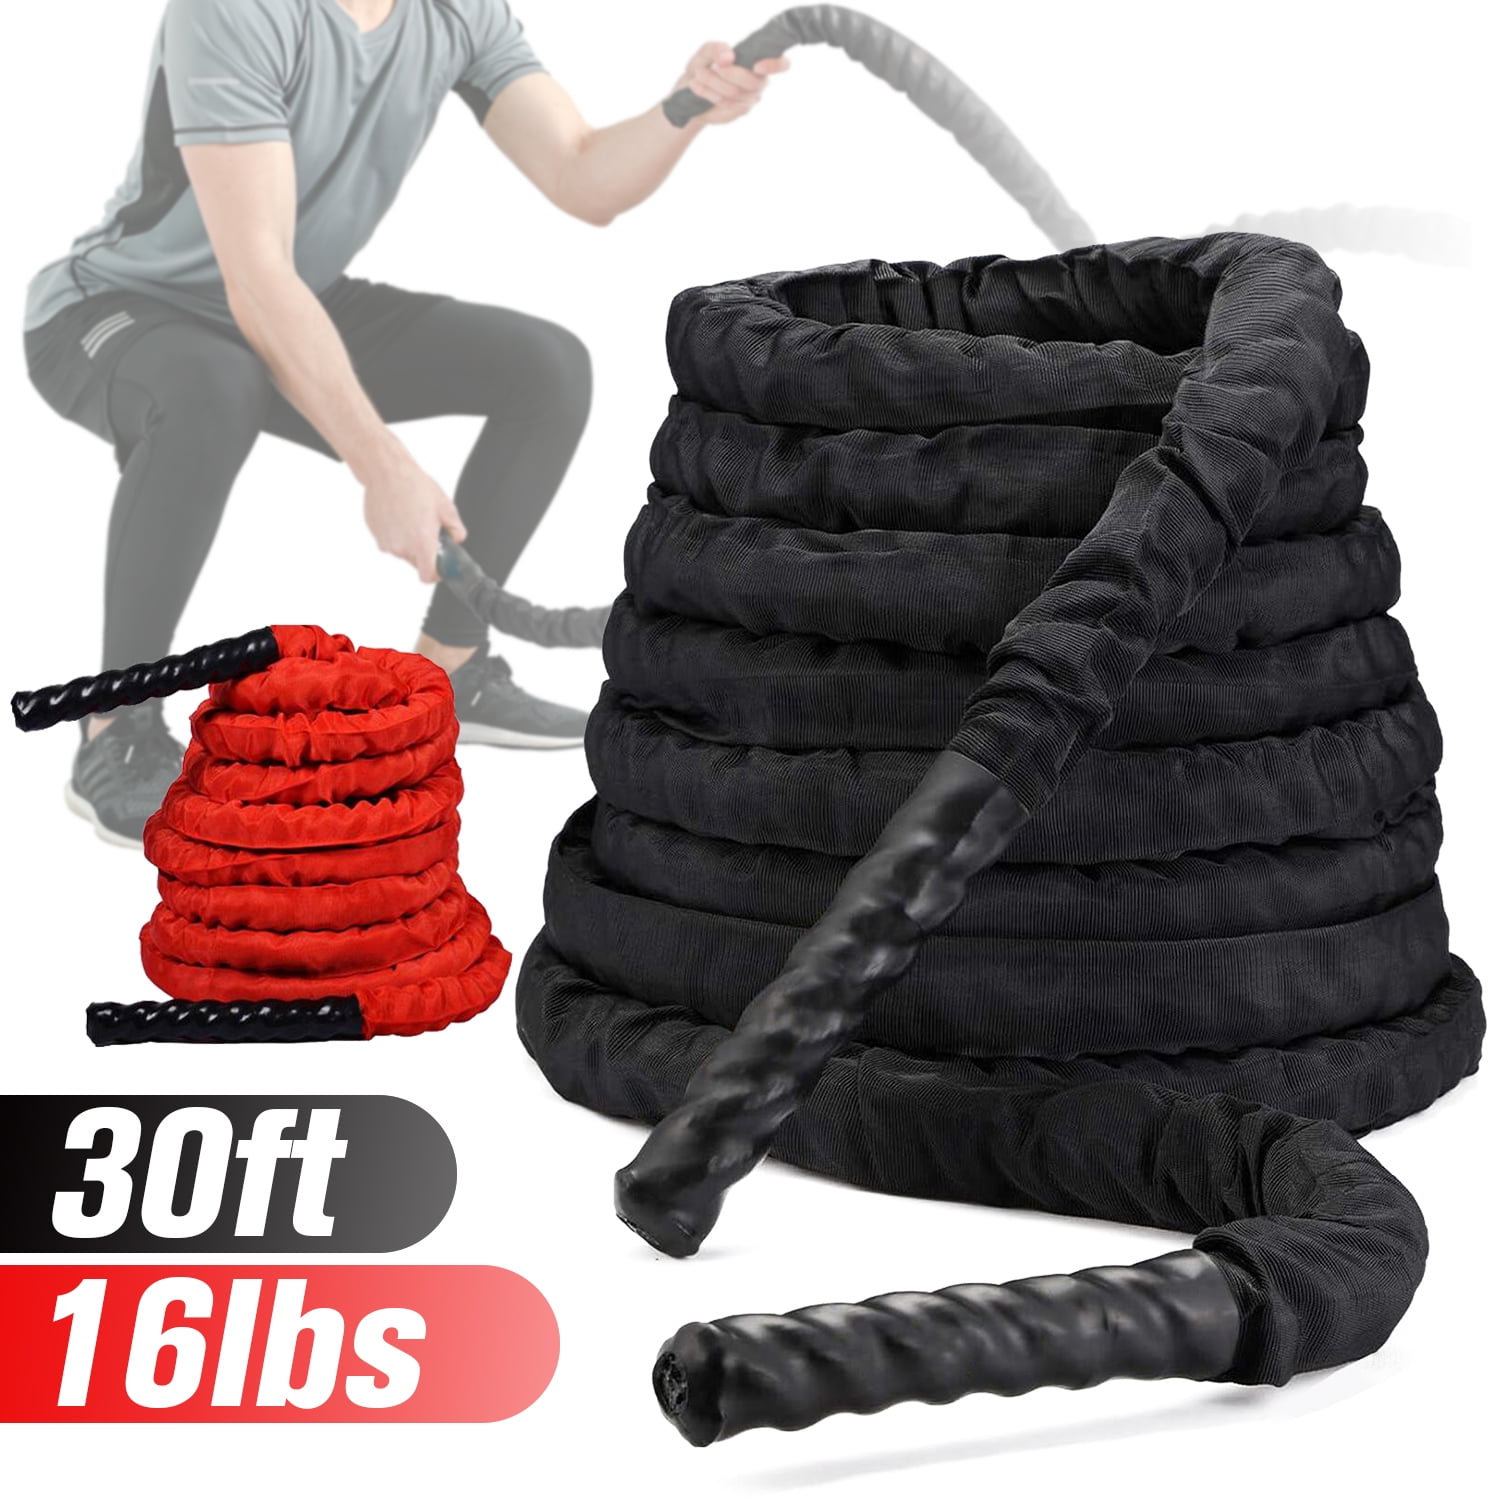 Sports Equipment Home, Heavy Rope Exercises, Exercise Battle Rope